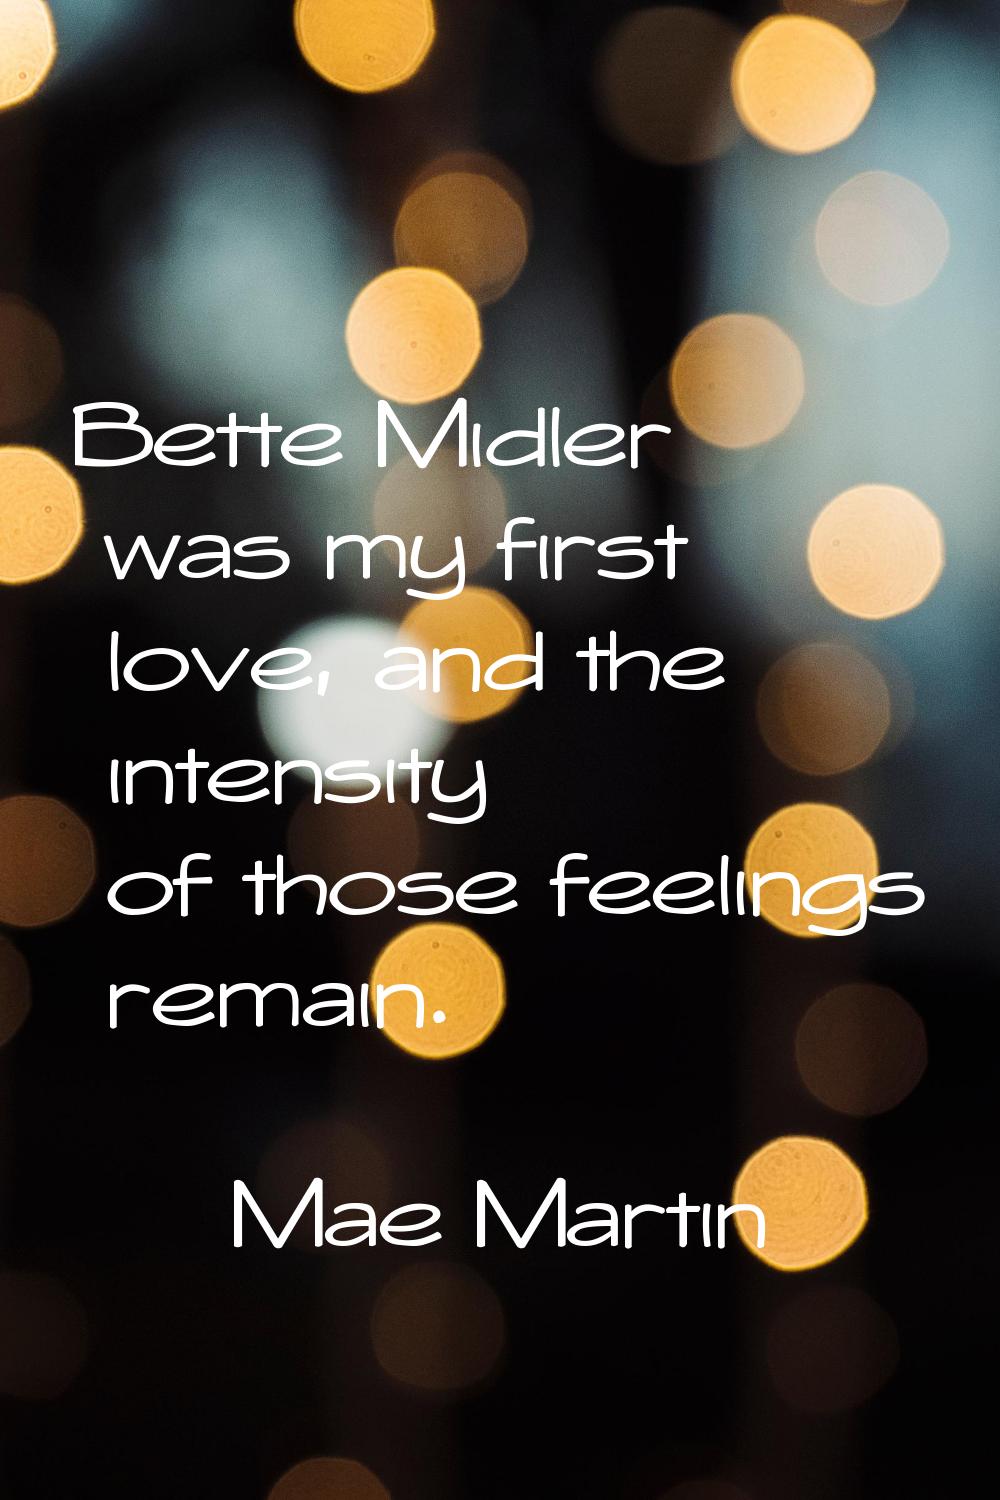 Bette Midler was my first love, and the intensity of those feelings remain.